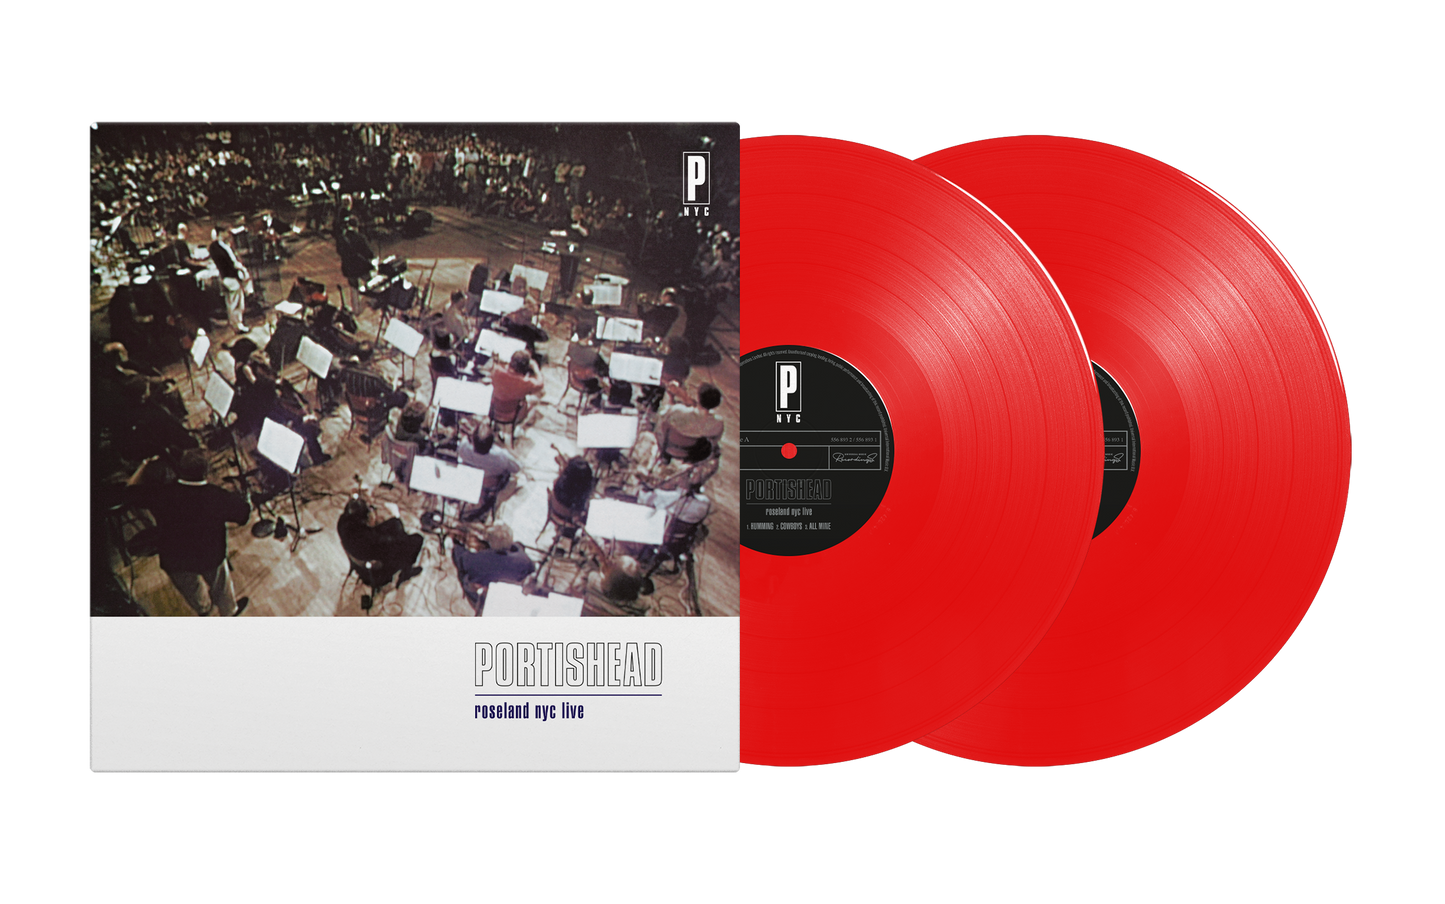  Portishead - Roseland NYC Live | Buy the Vinyl LP from Flying Nun Records 